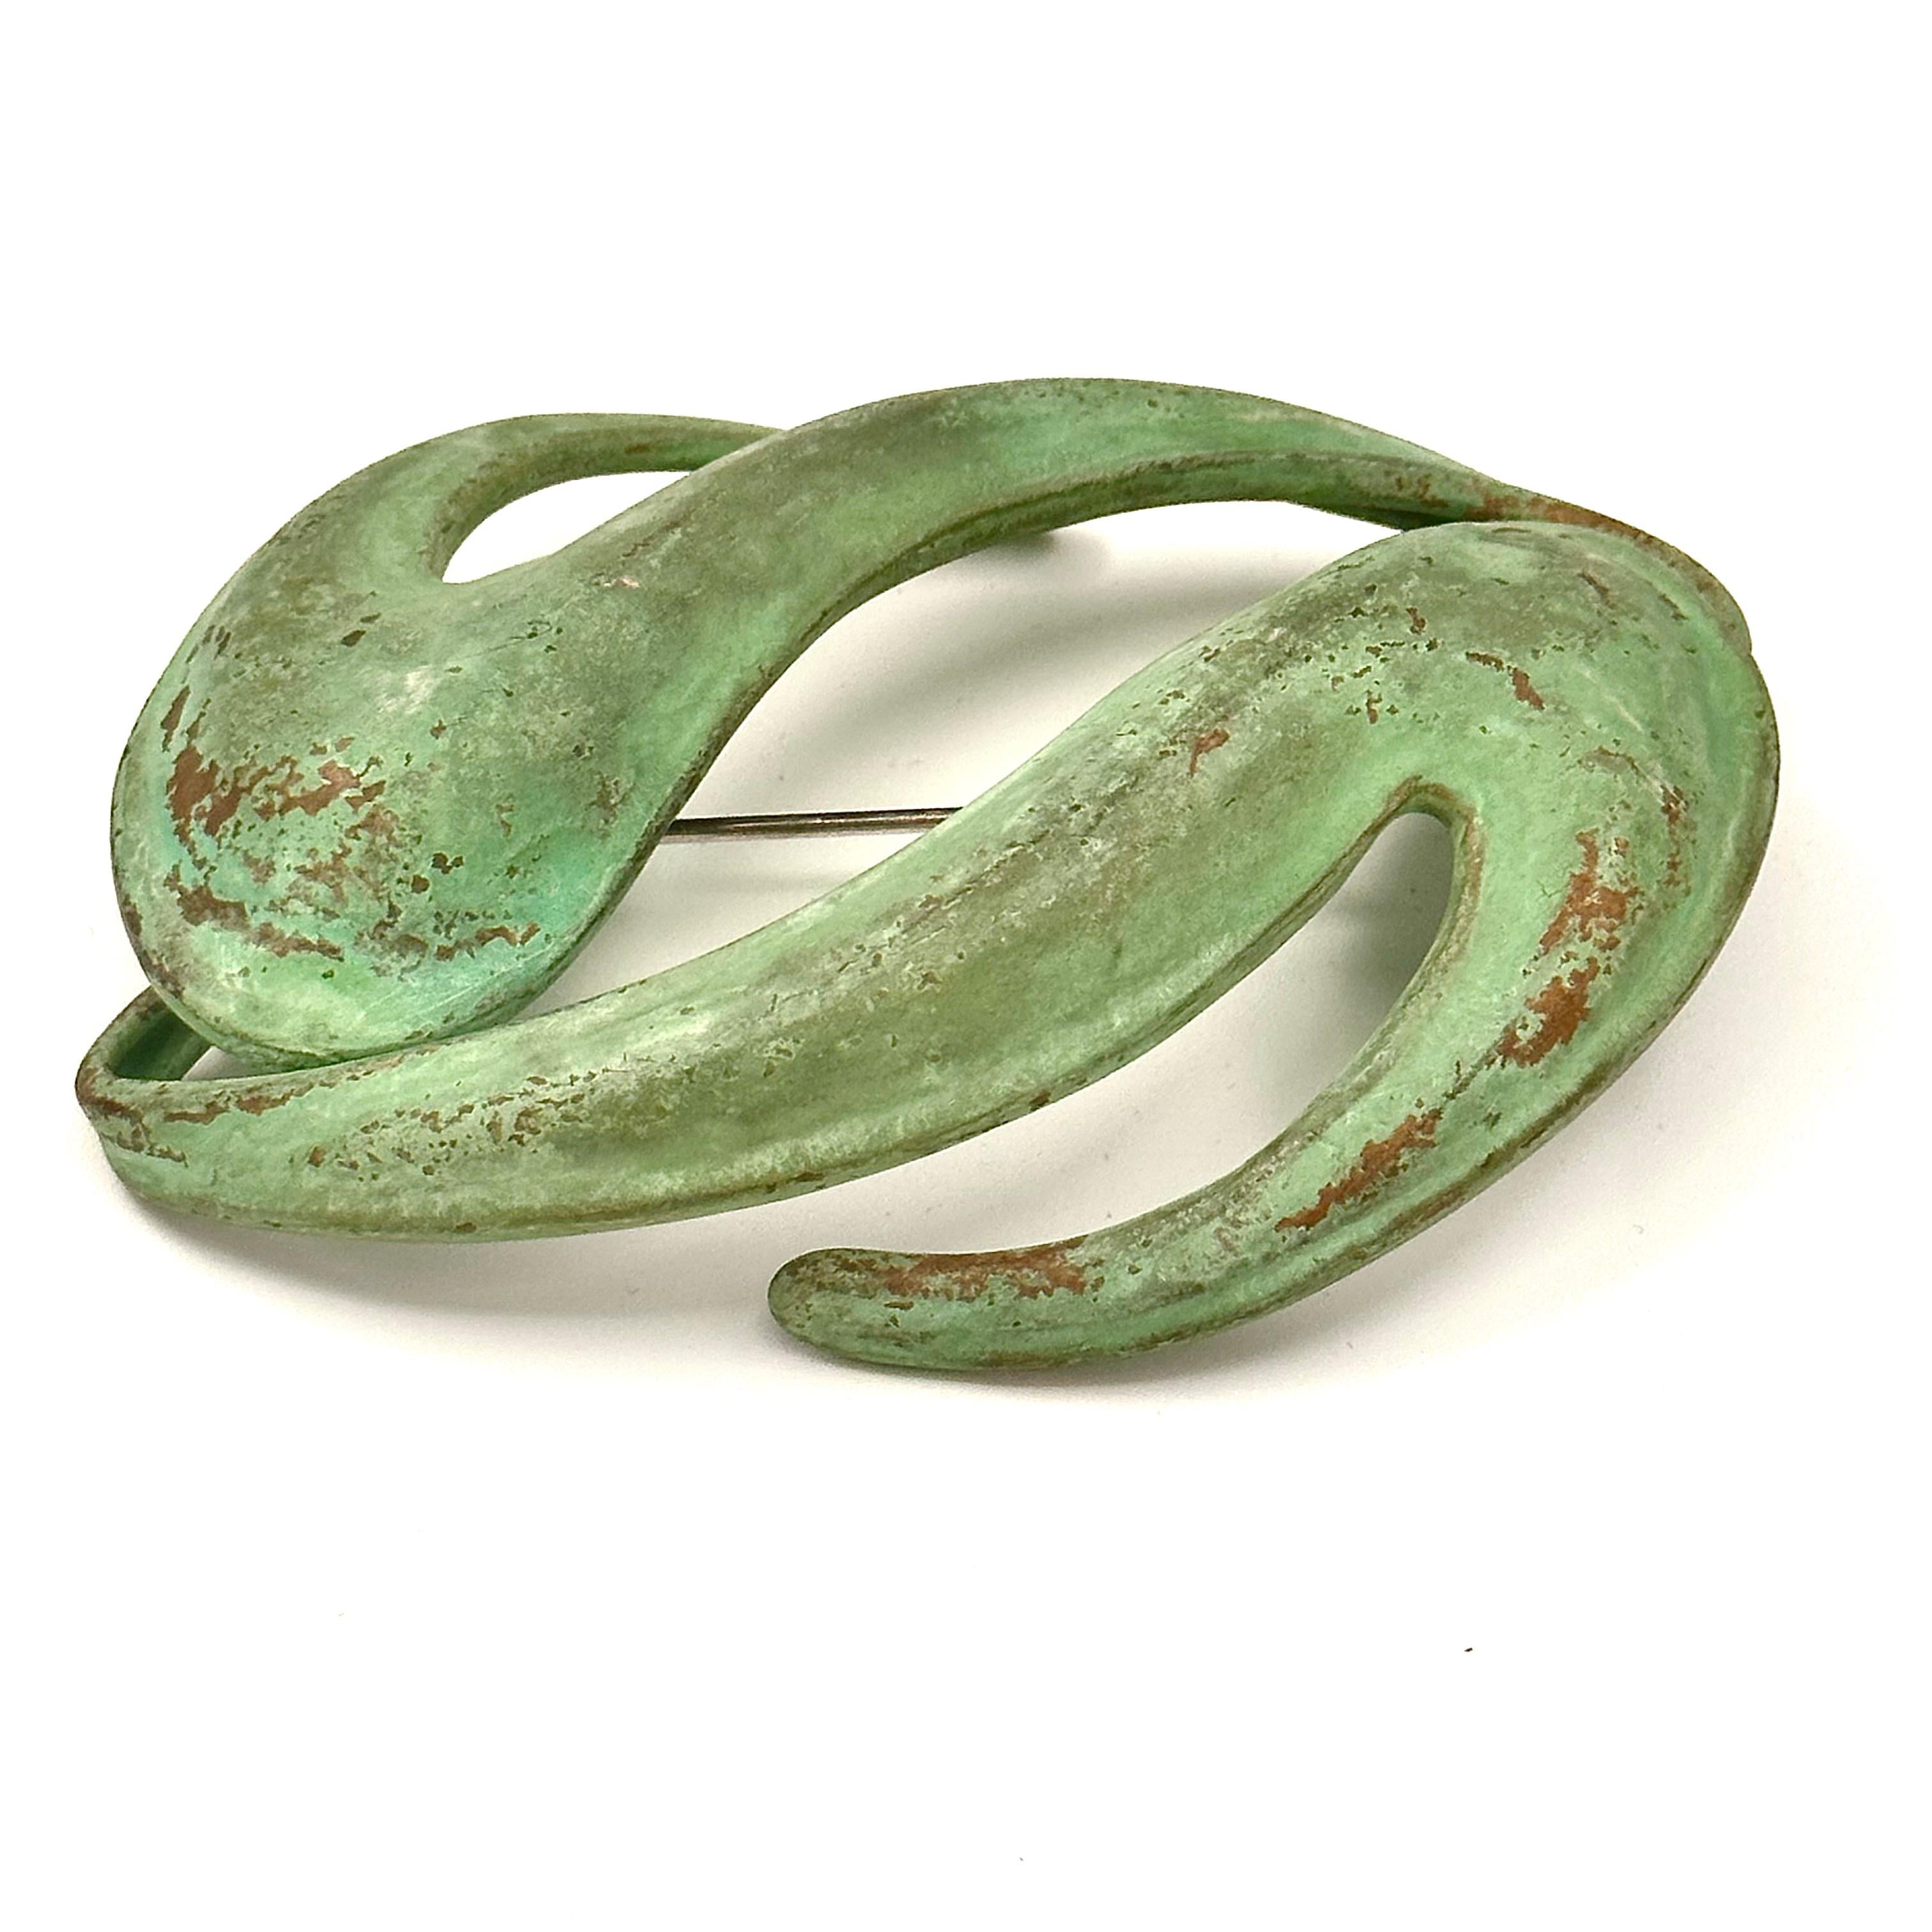 The scale and color and form of this brooch is iconic Robert Lee Morris fashion/art jewelry. First is the voluptuous shapes that are crafted into a flowing, undulating sculpture that is then Colored with a Verdigris oxidation, which gives it a